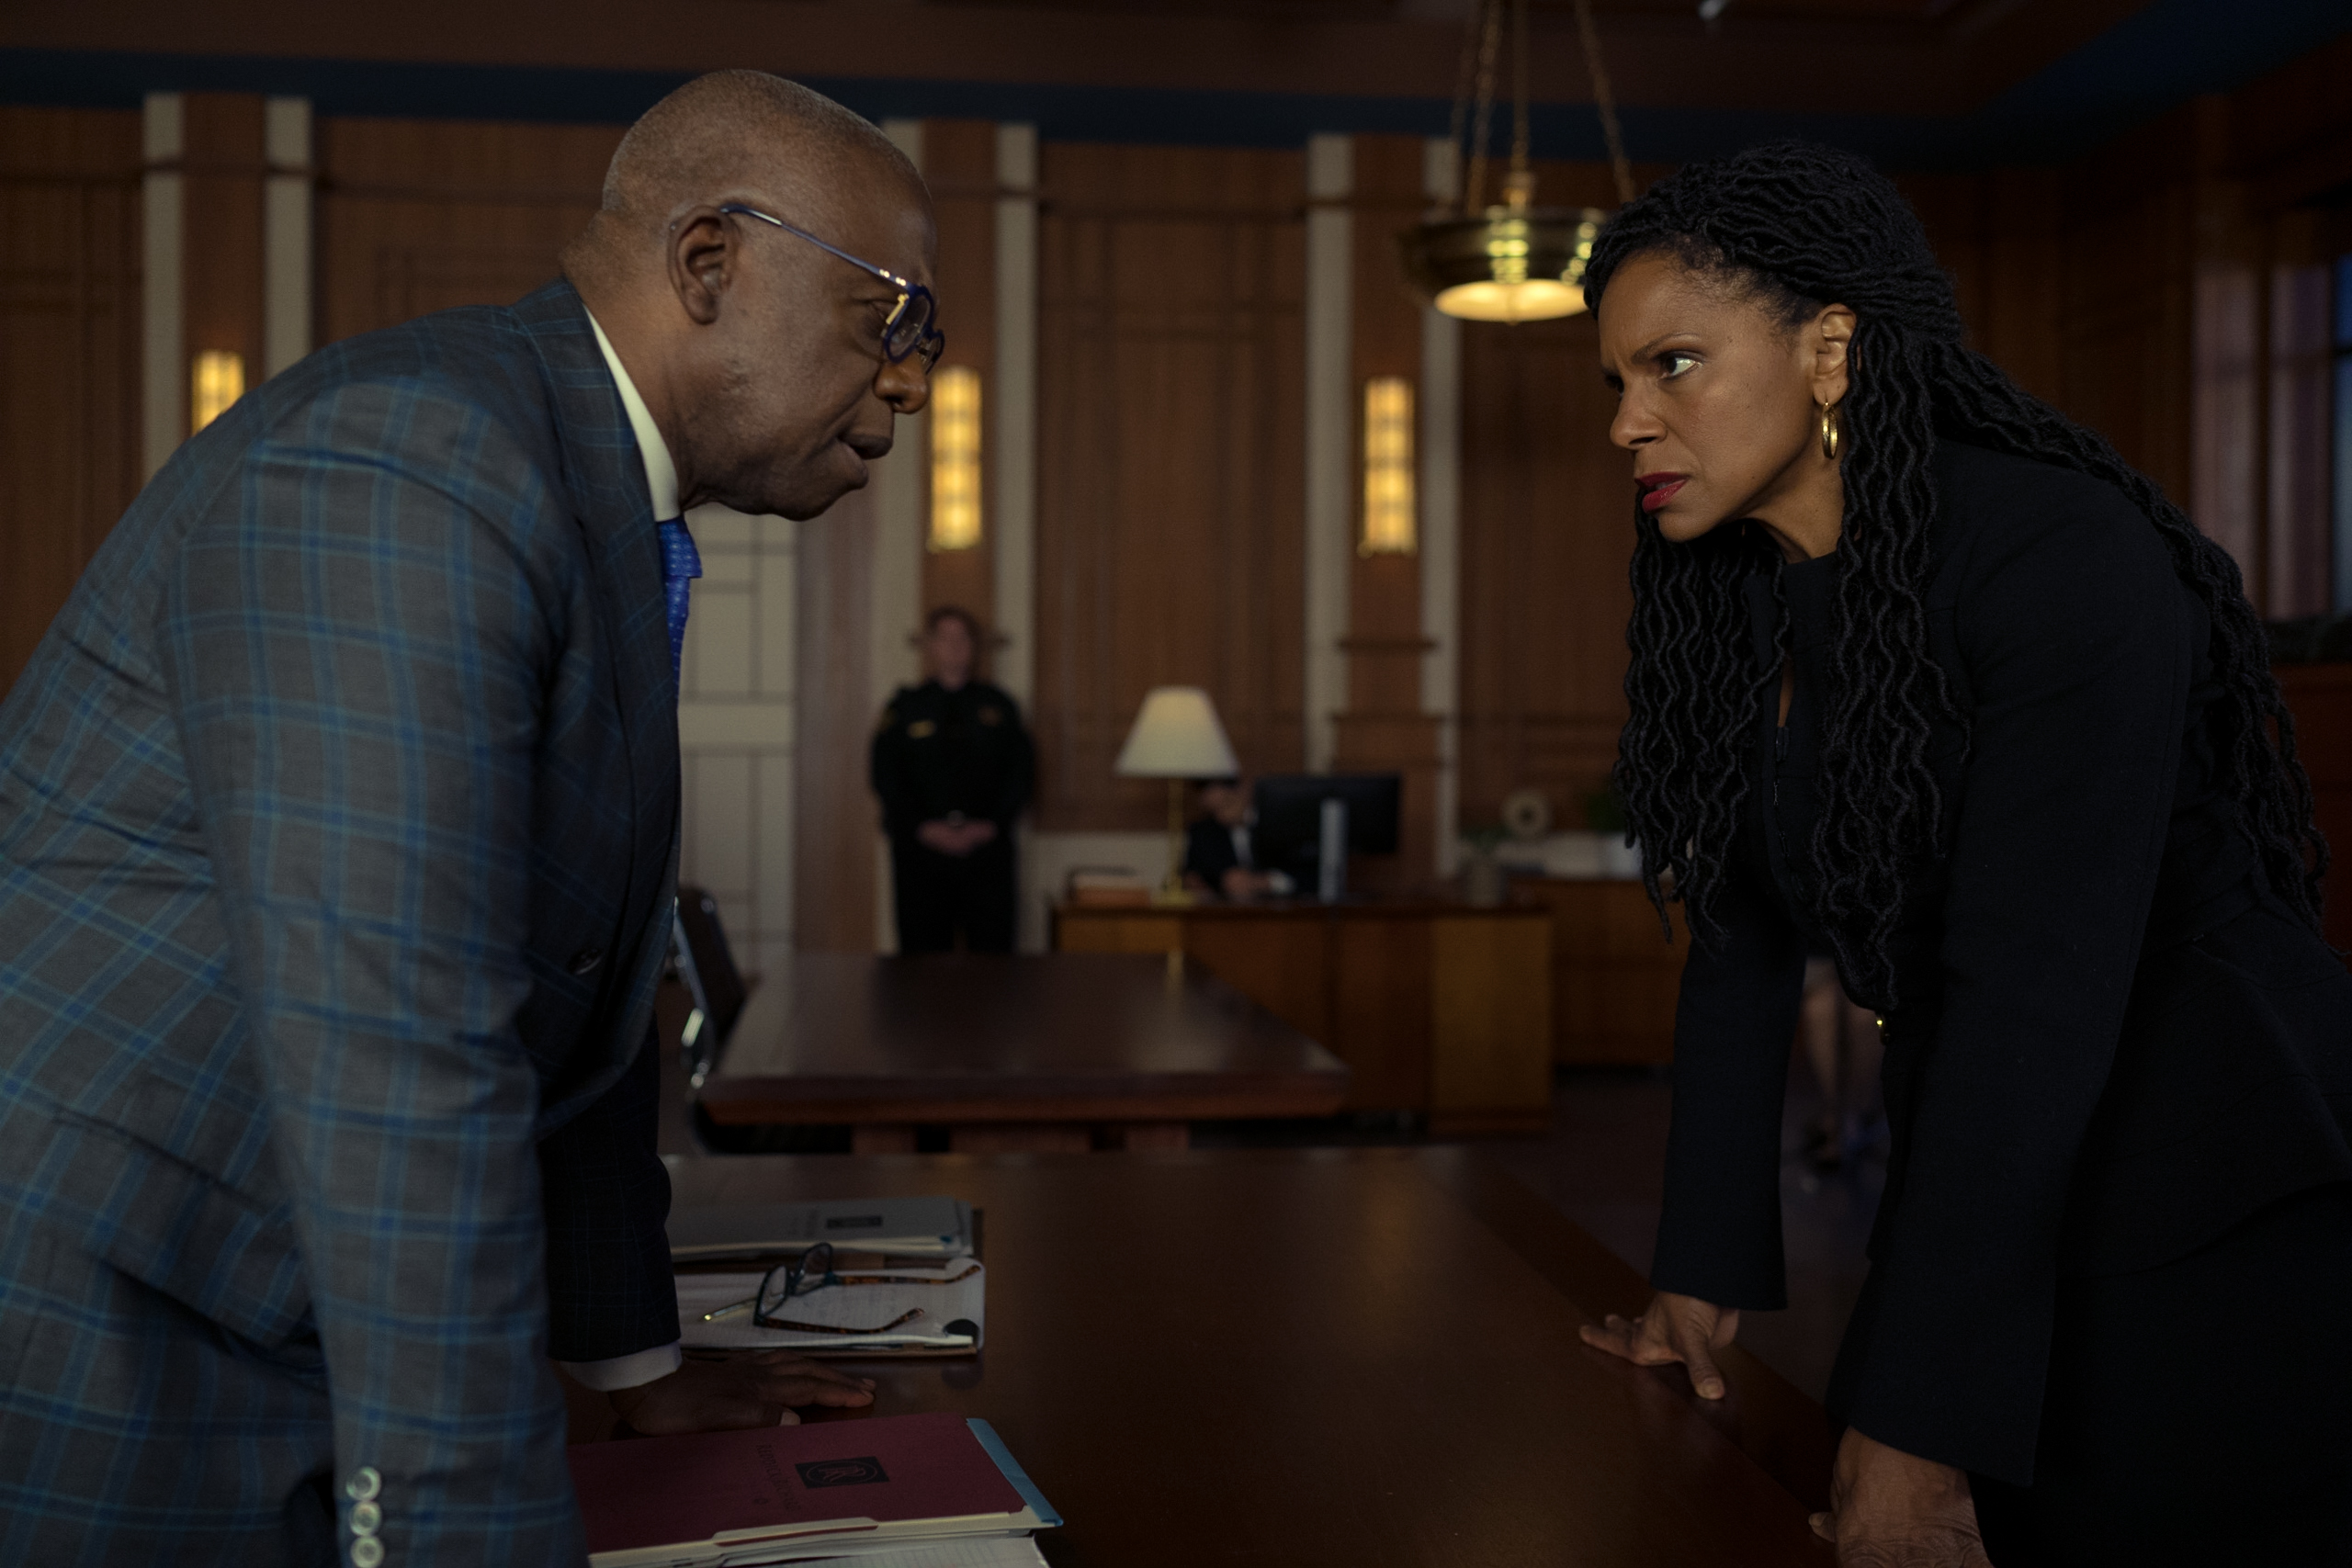 The Good Fight 6x08 "The End of Playing Games" André Braugher as Ri’Chard Lane and Audra McDonald as Liz Reddick